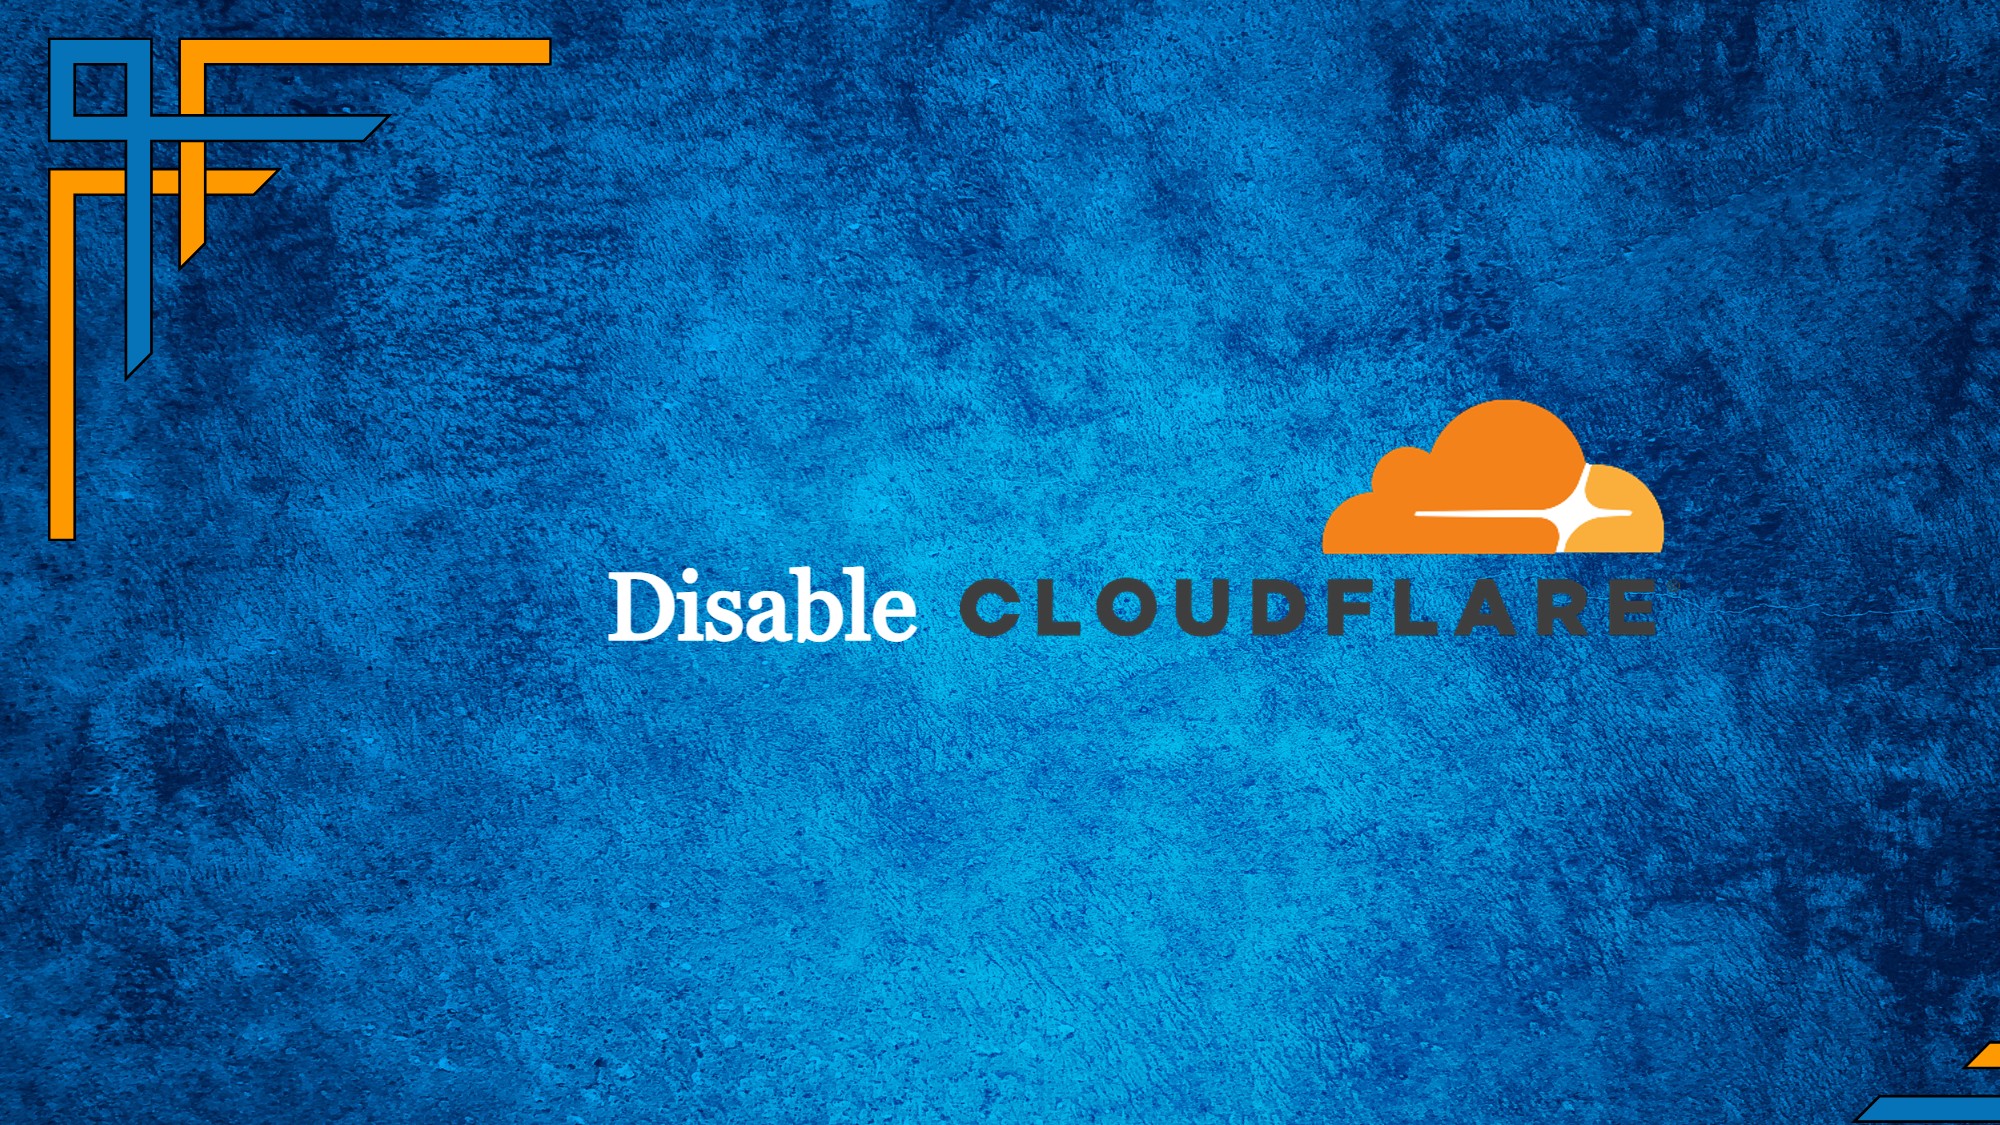 How to Disable Cloudflare Safely